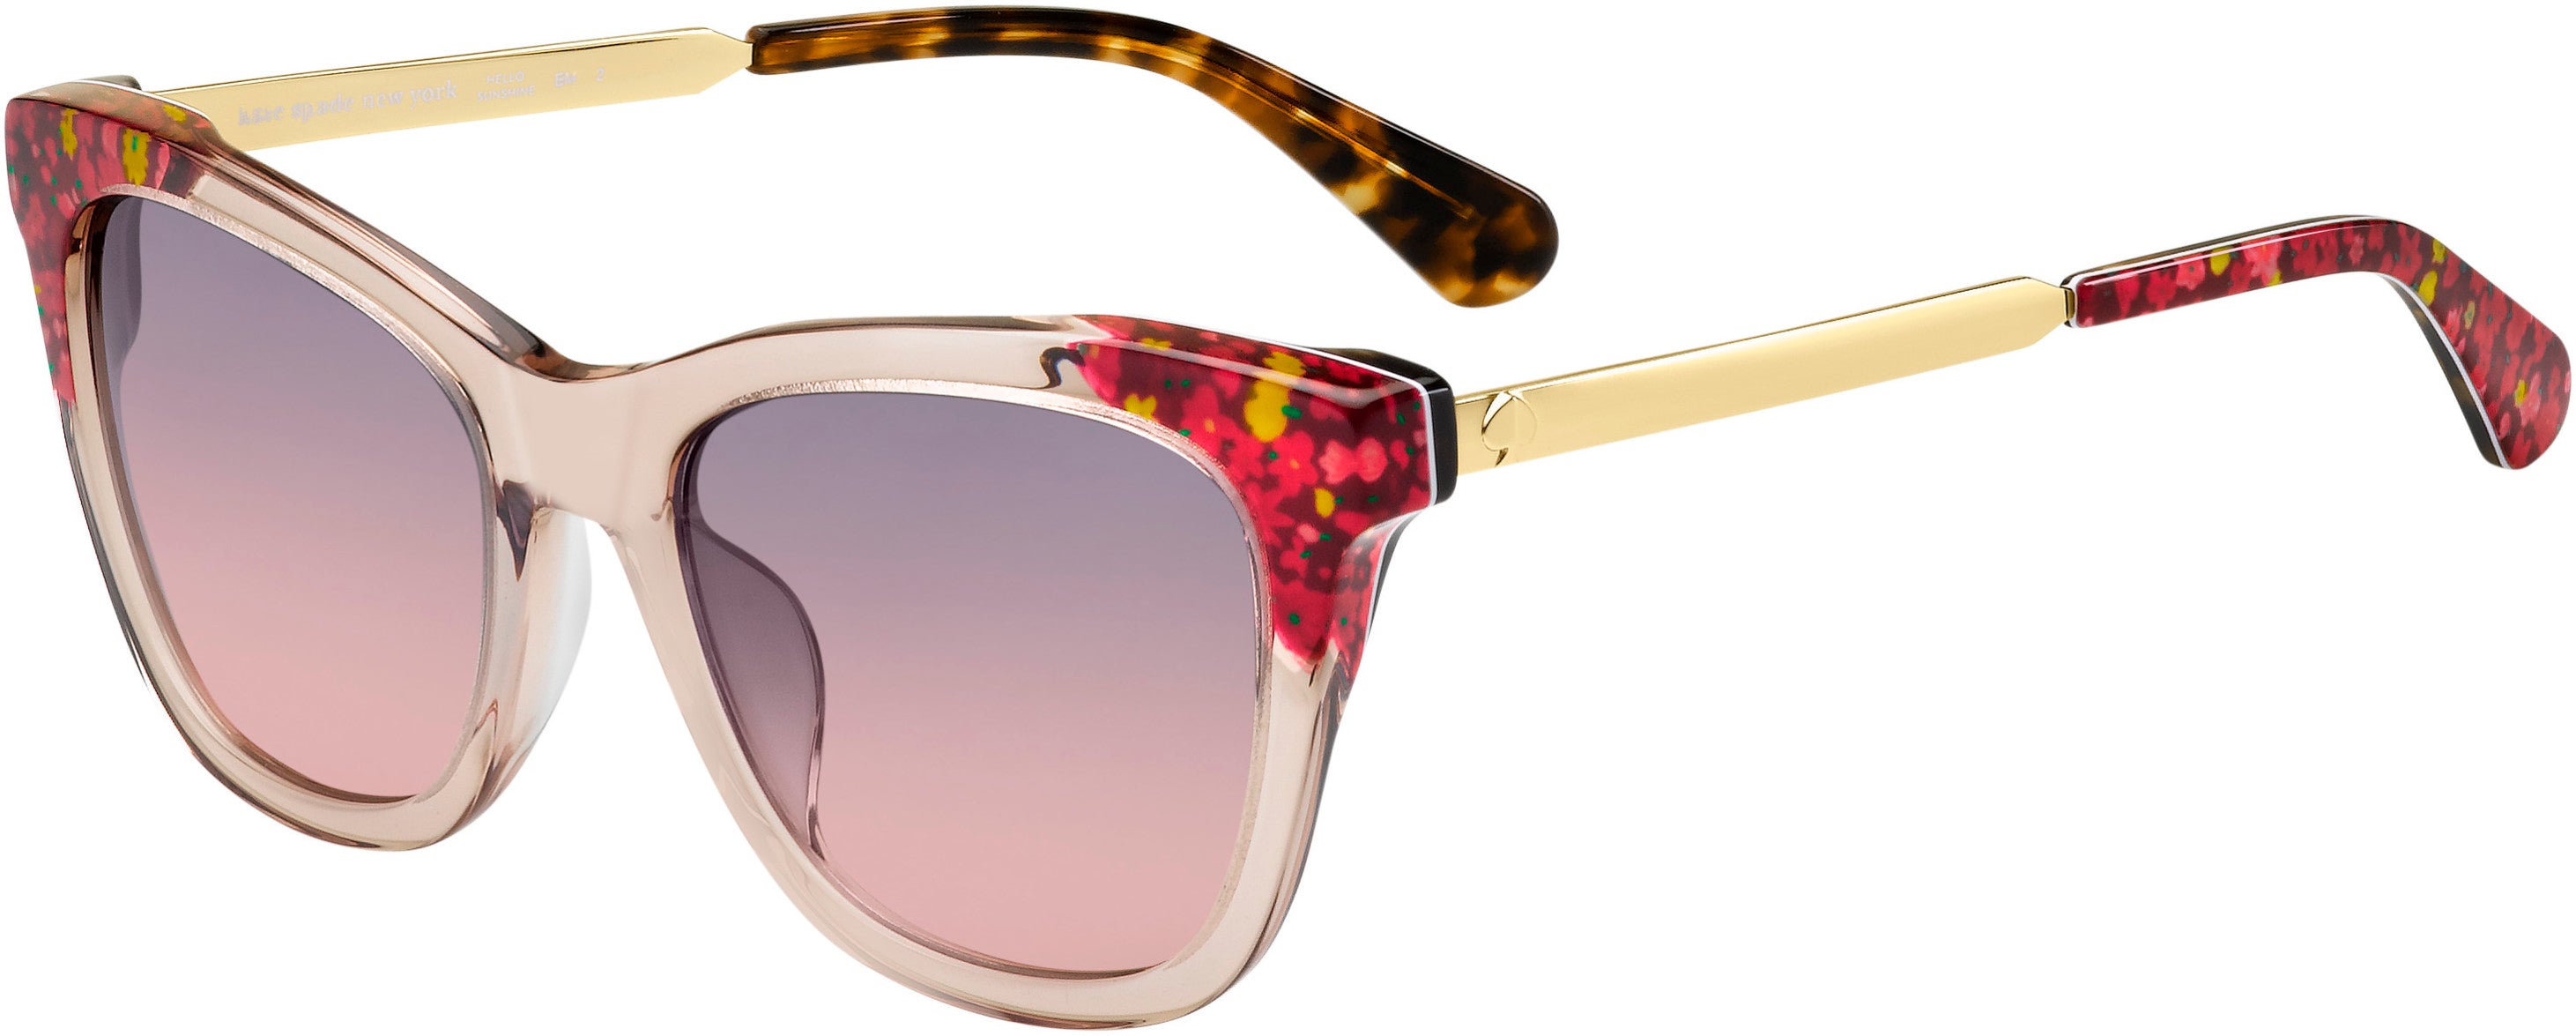 Kate Spade Alexane/S Square Sunglasses 0OBL-0OBL  Graphic Pink (FF Gray Shded Pink)